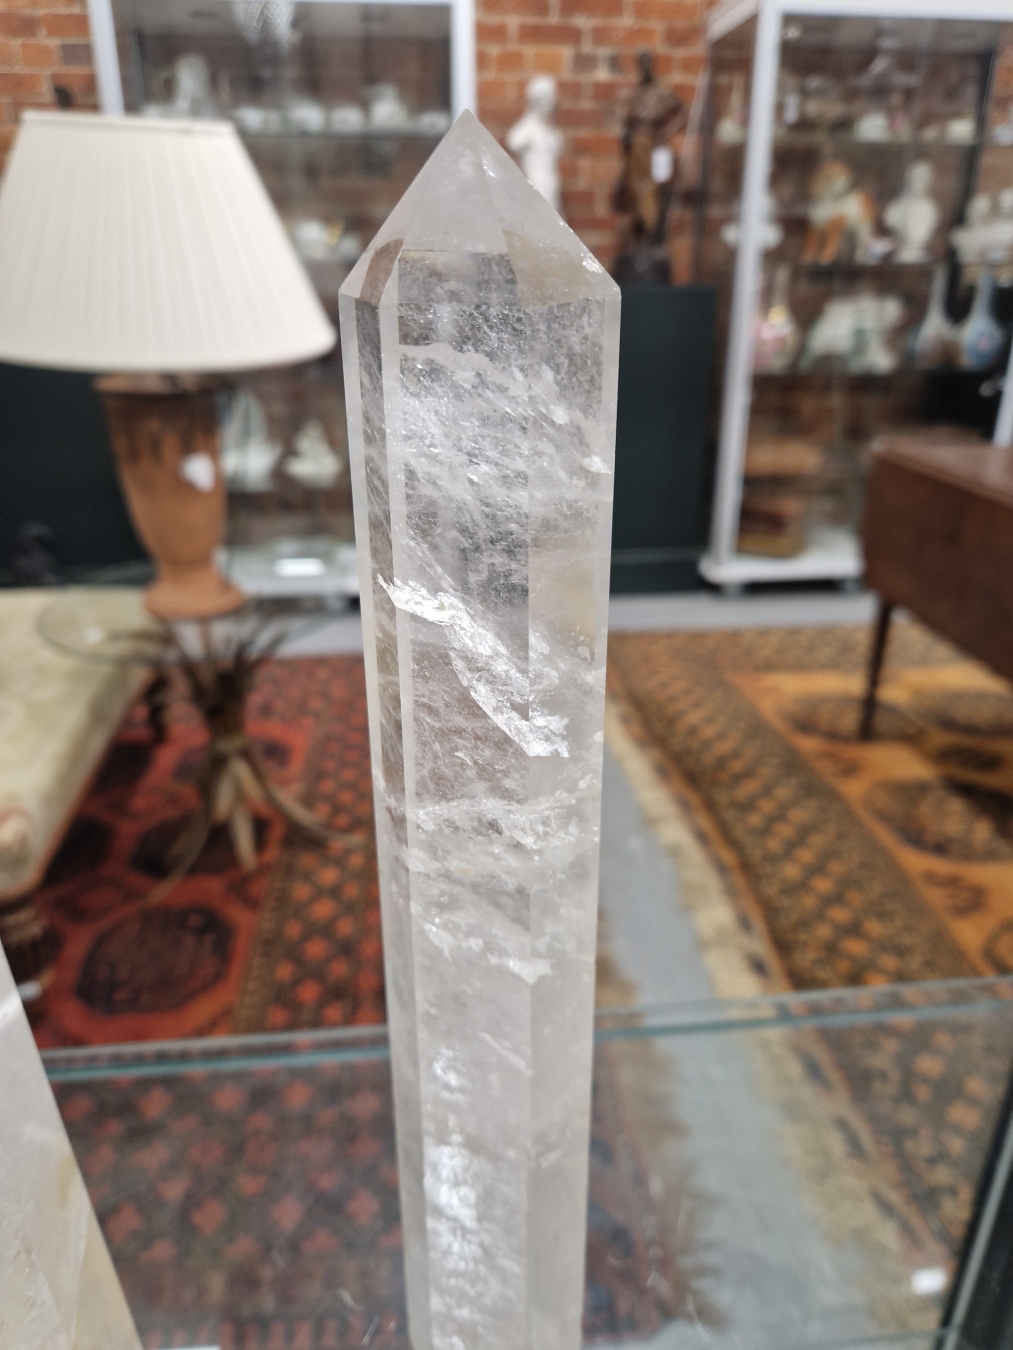 A PAIR OF CUT ROCK CRYSTAL OBELISK TOGETHER WITH A NATURAL CRYSTAL FORMATION - Image 5 of 8